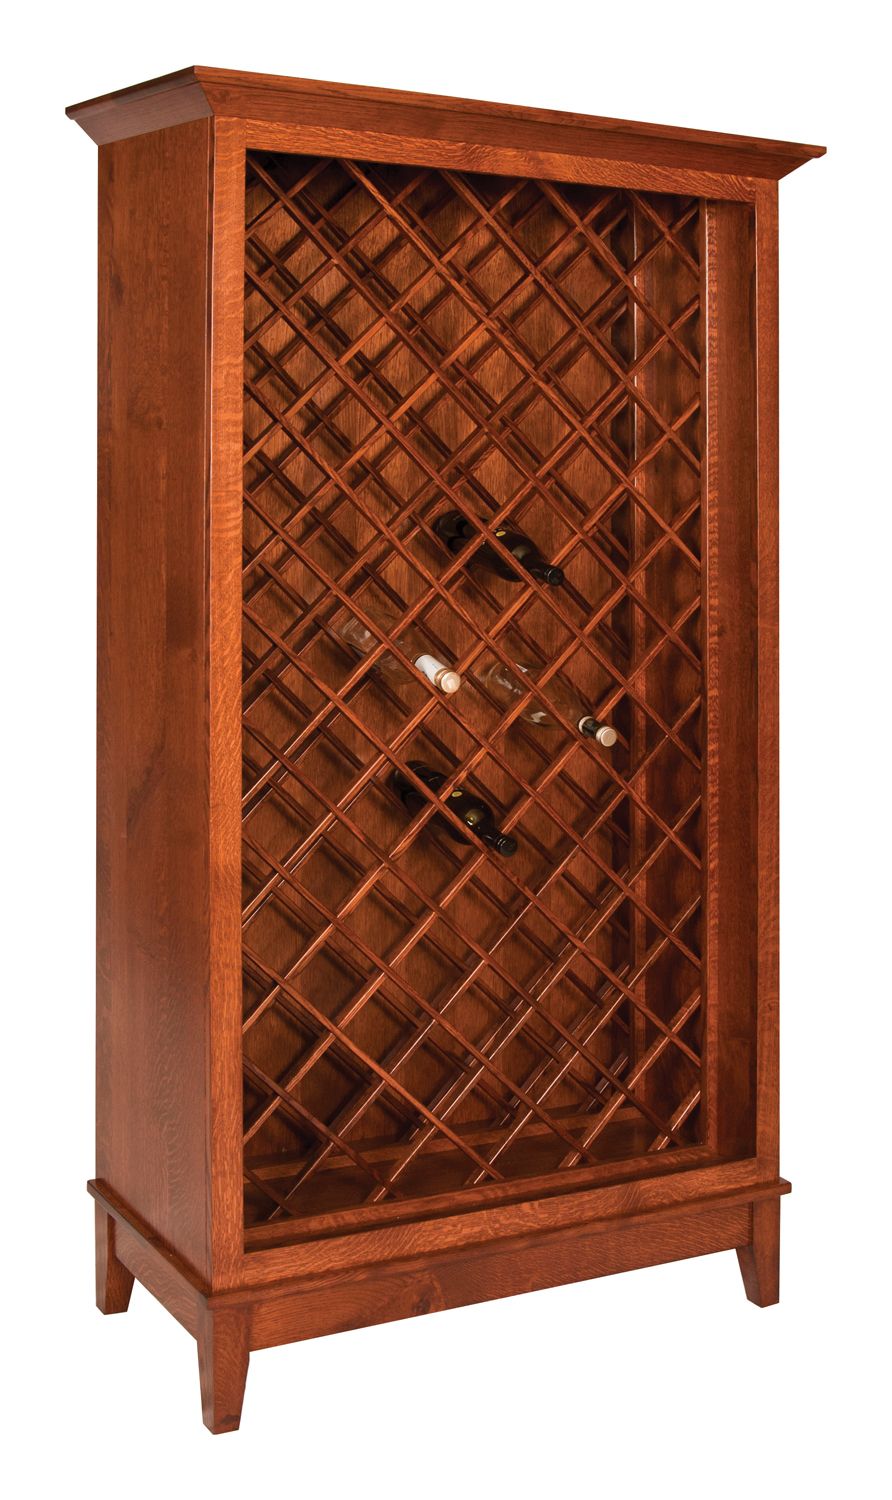 Mlw 510 cantberbury wine cabinet dsc 0011 cp